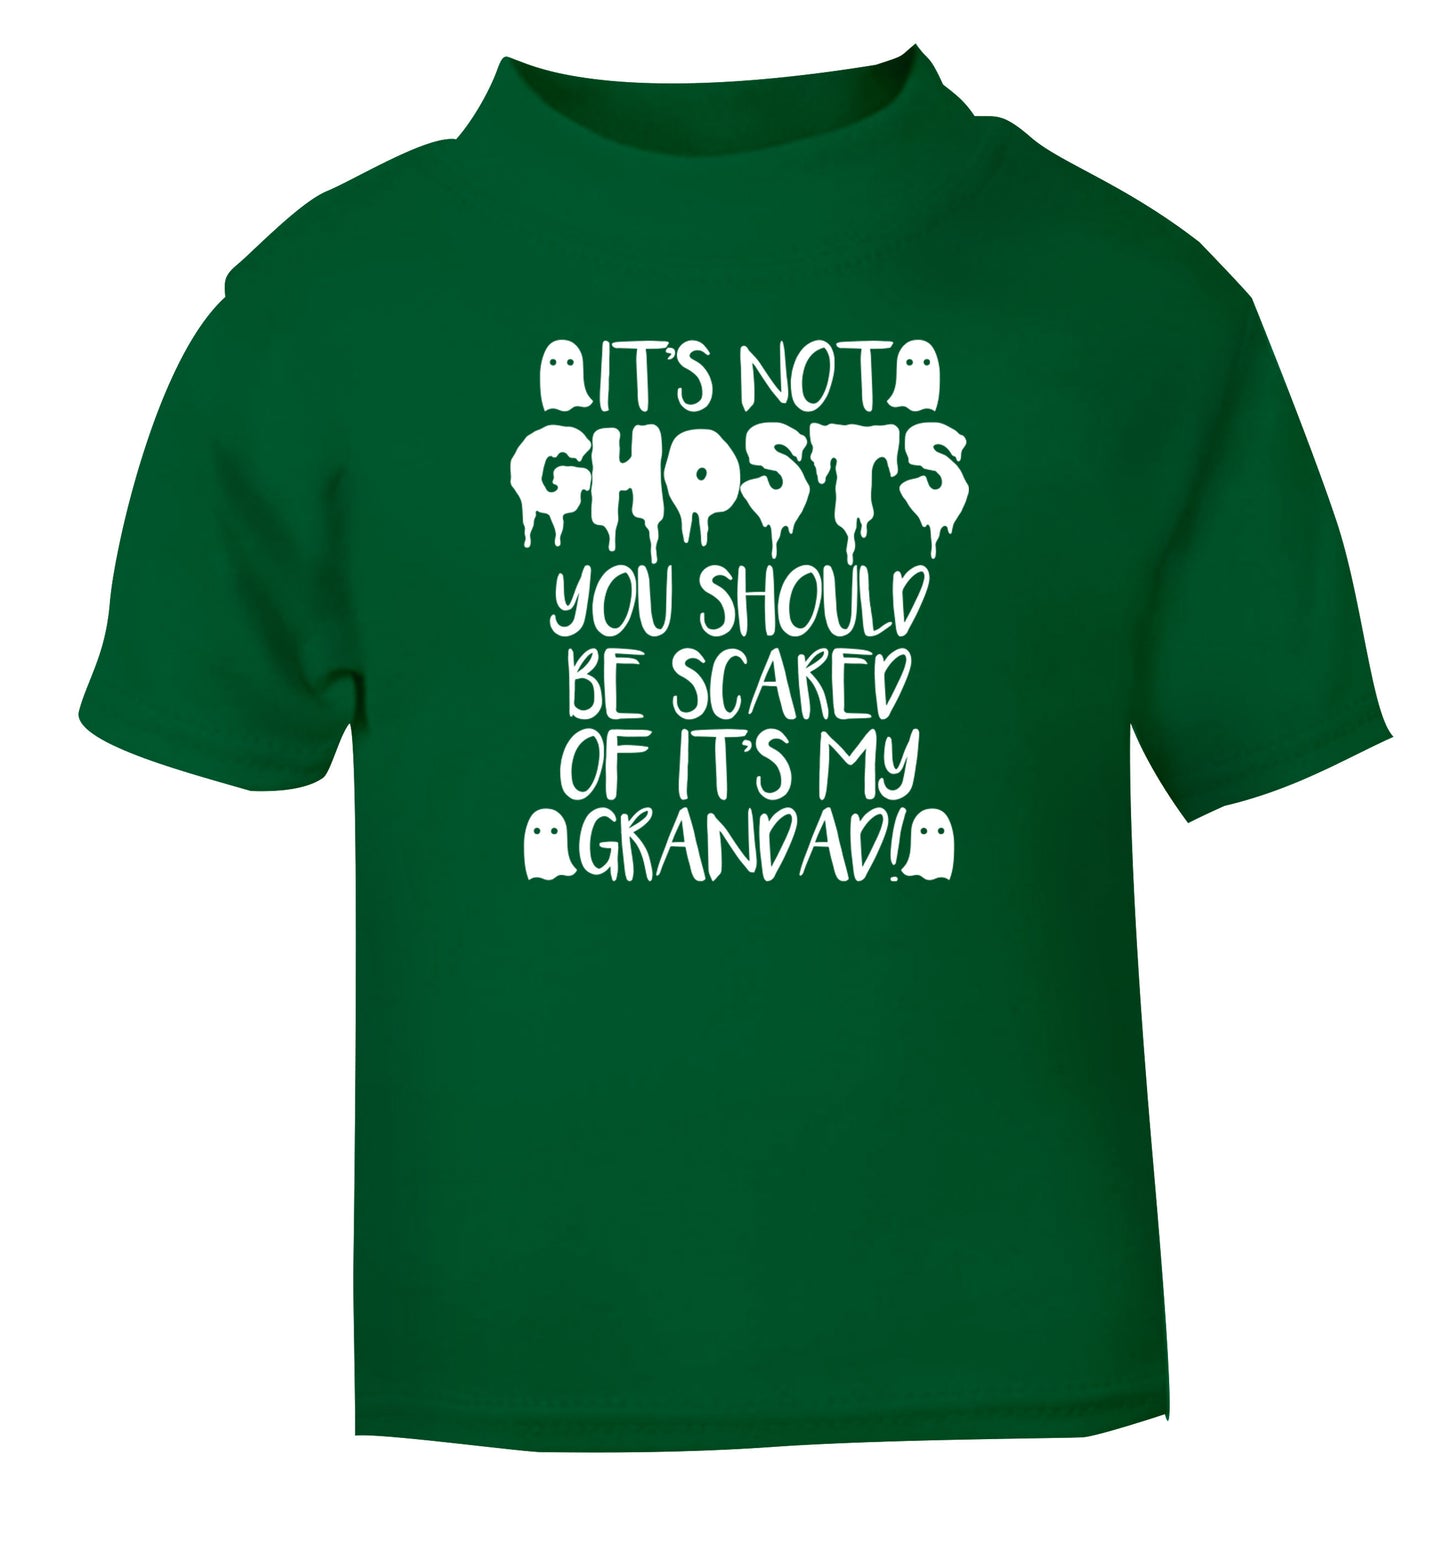 It's not ghosts you should be scared of it's my grandad! green Baby Toddler Tshirt 2 Years